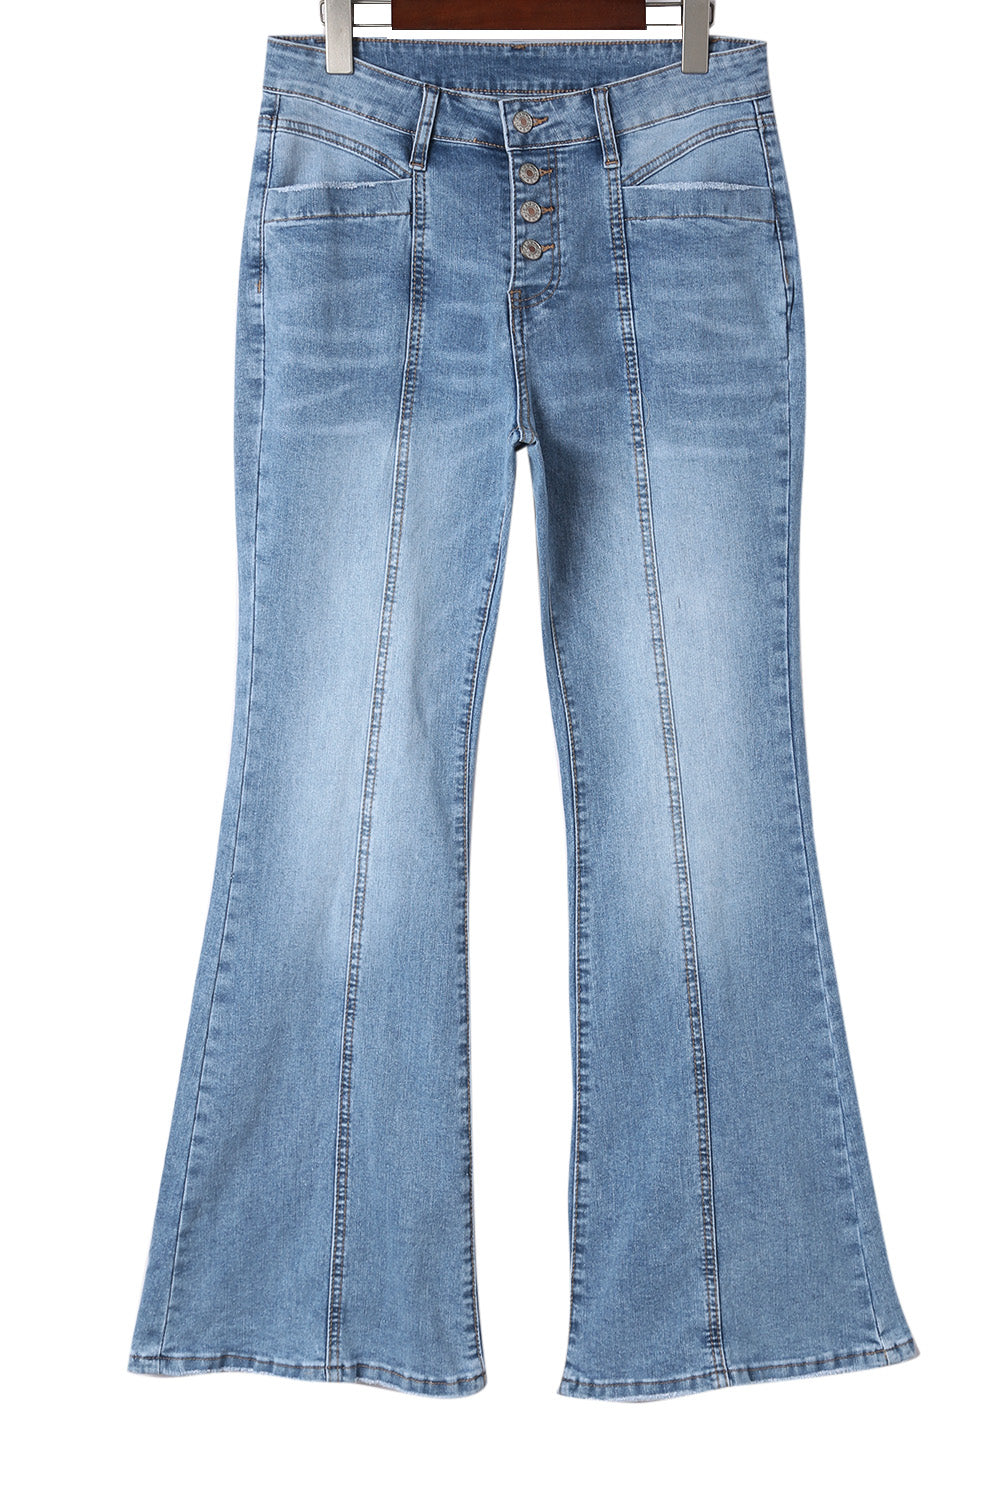 Sky Blue Button Fly Seamed Flare Jeans Jeans JT's Designer Fashion